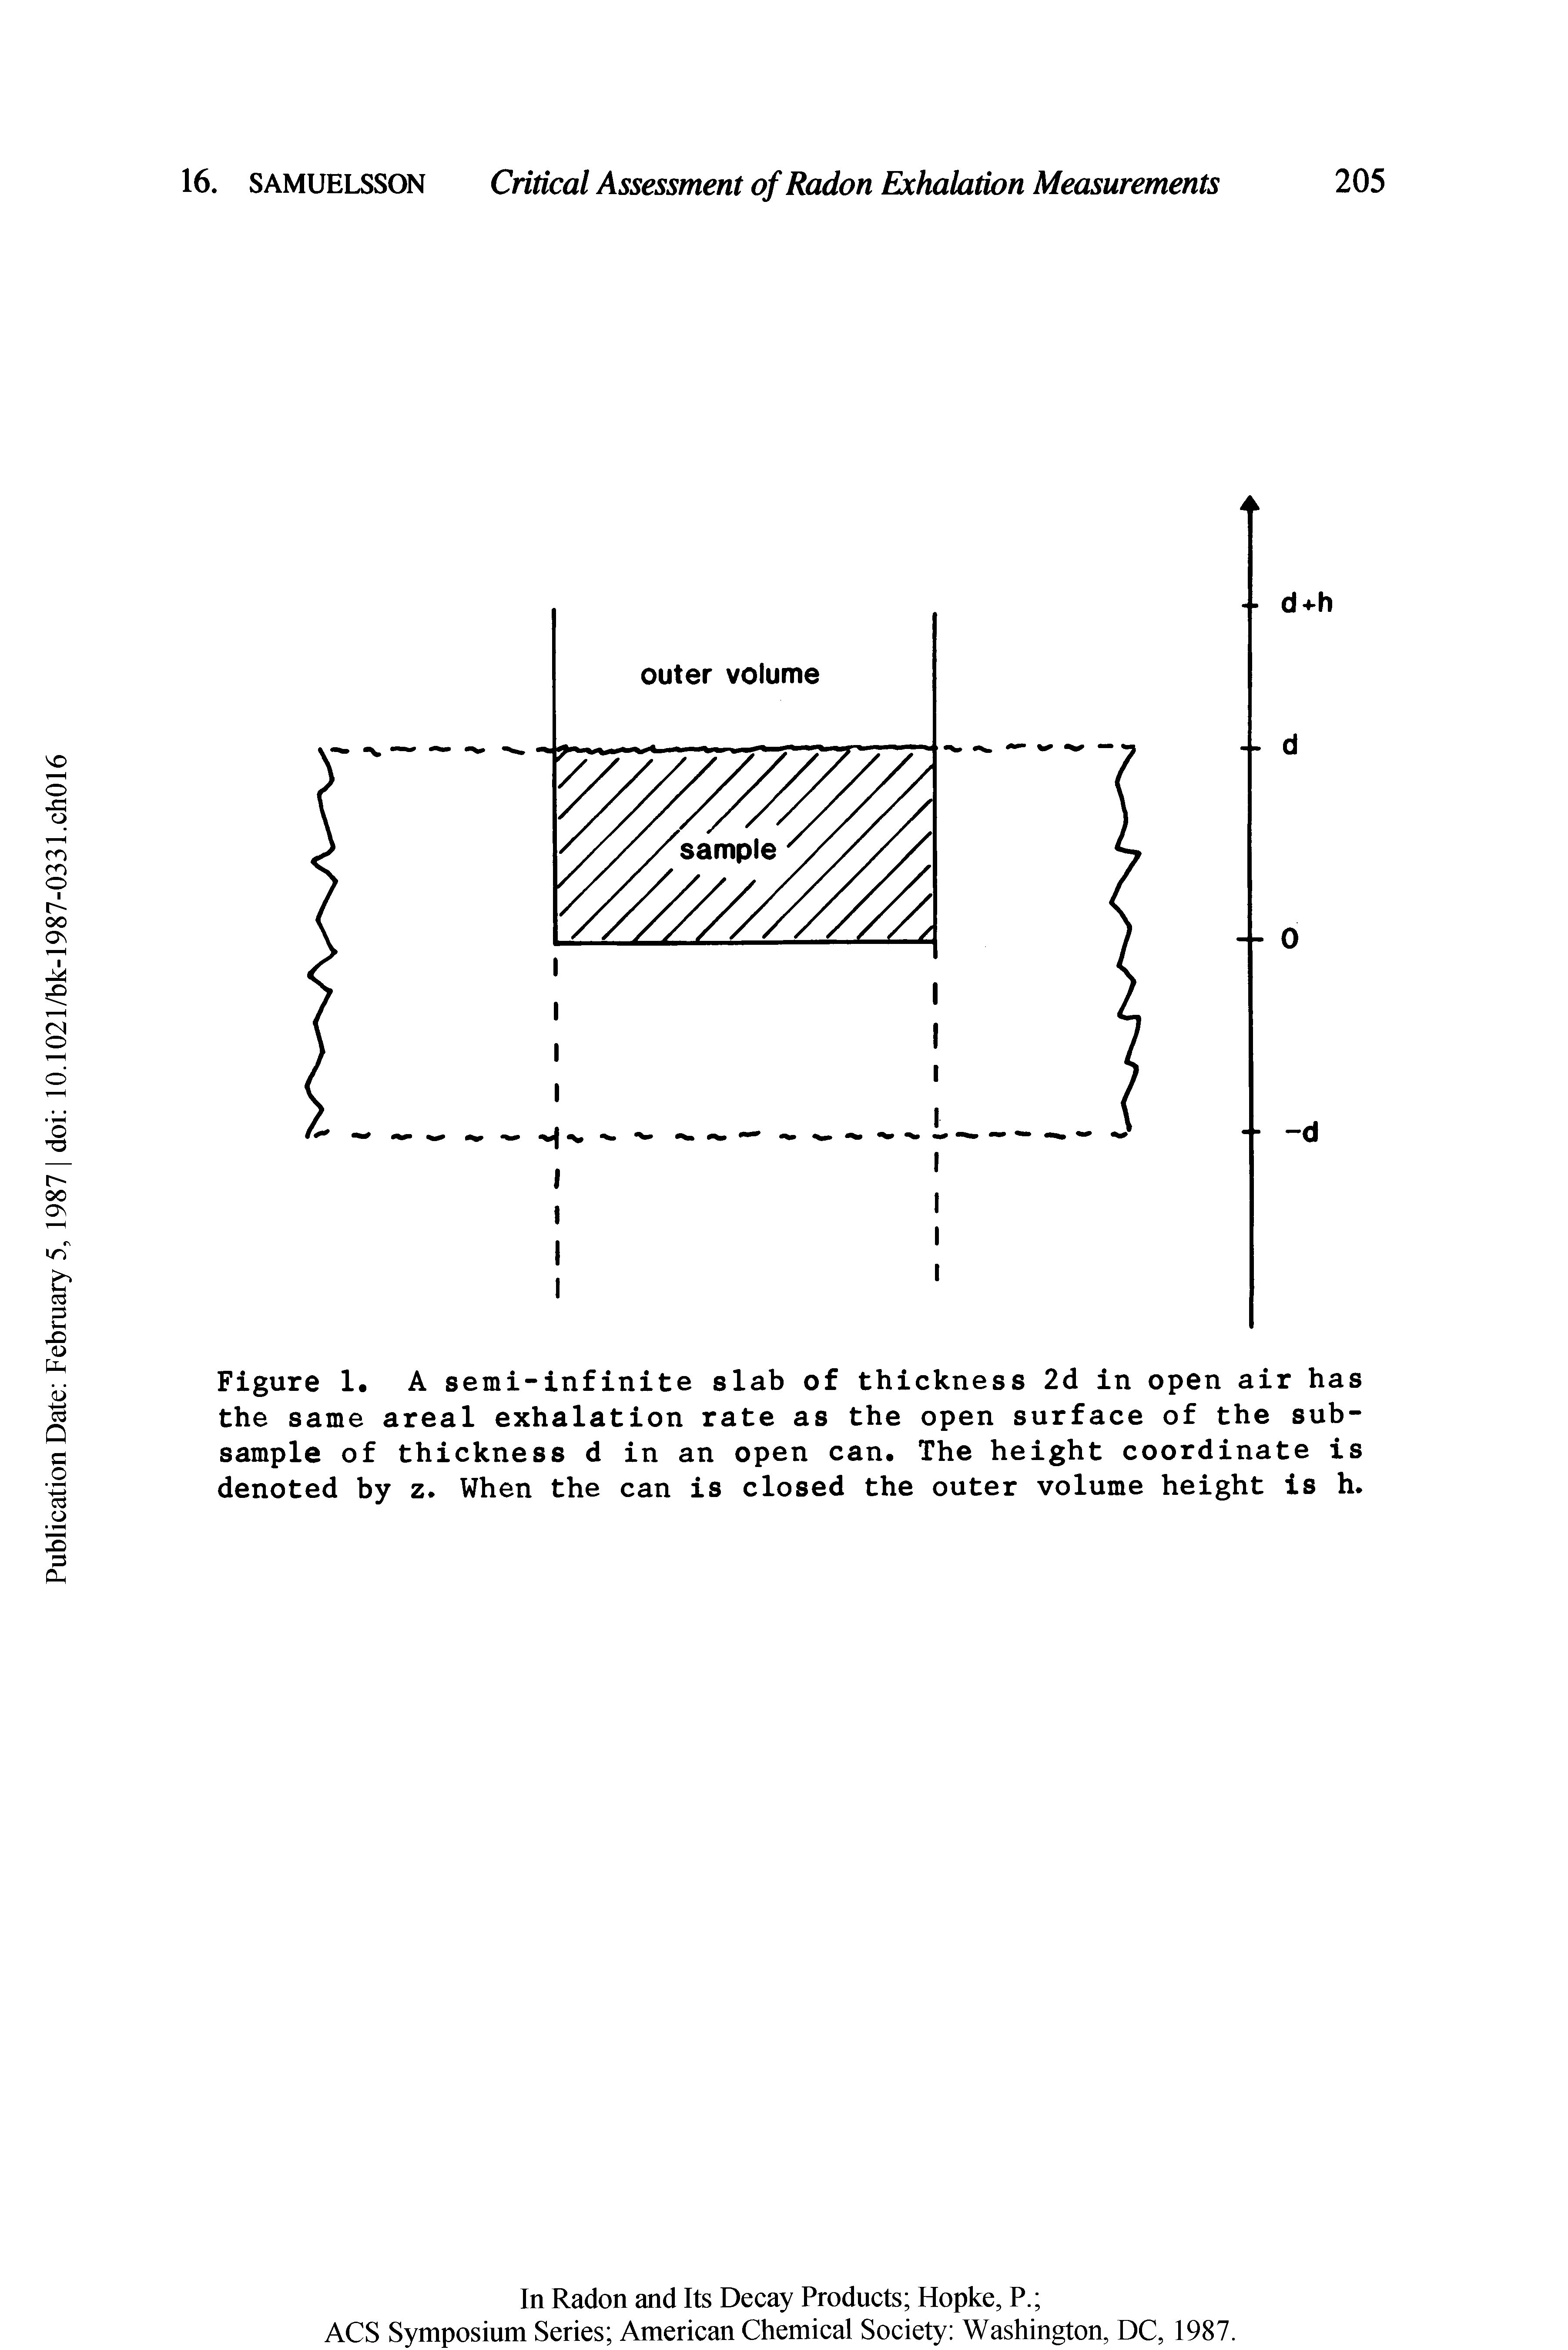 Figure 1. A semi-infinite slab of thickness 2d in open air has the same areal exhalation rate as the open surface of the subsample of thickness d in an open can. The height coordinate is denoted by z. When the can is closed the outer volume height is h.